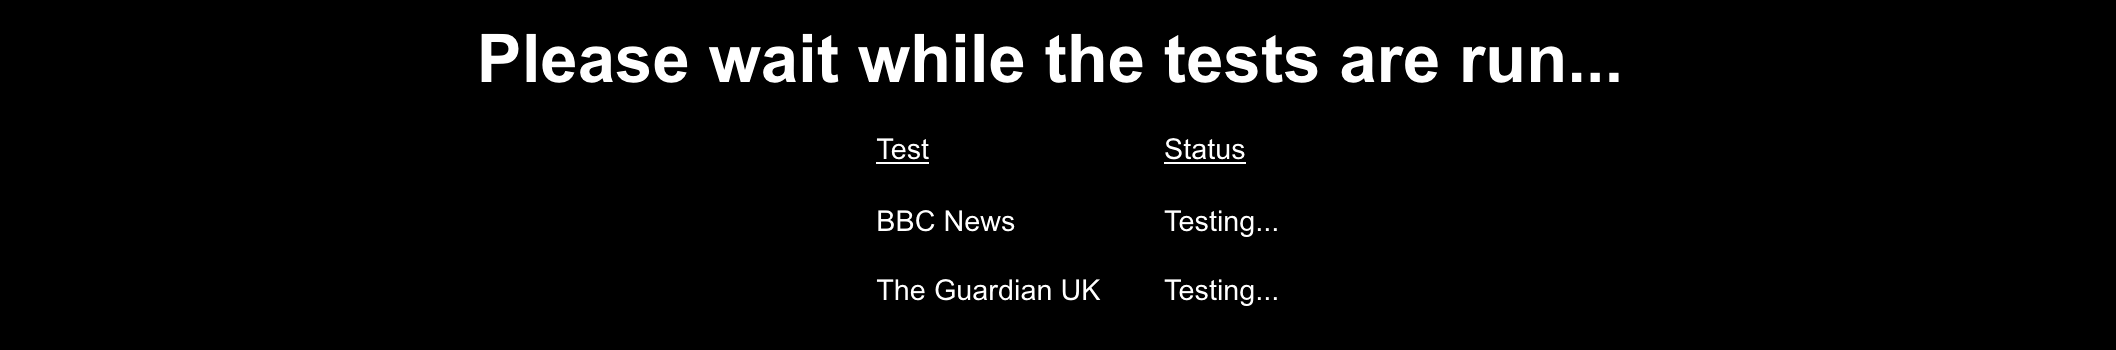 Here we see both tests listed, and the stages they are at in terms of the testing process.